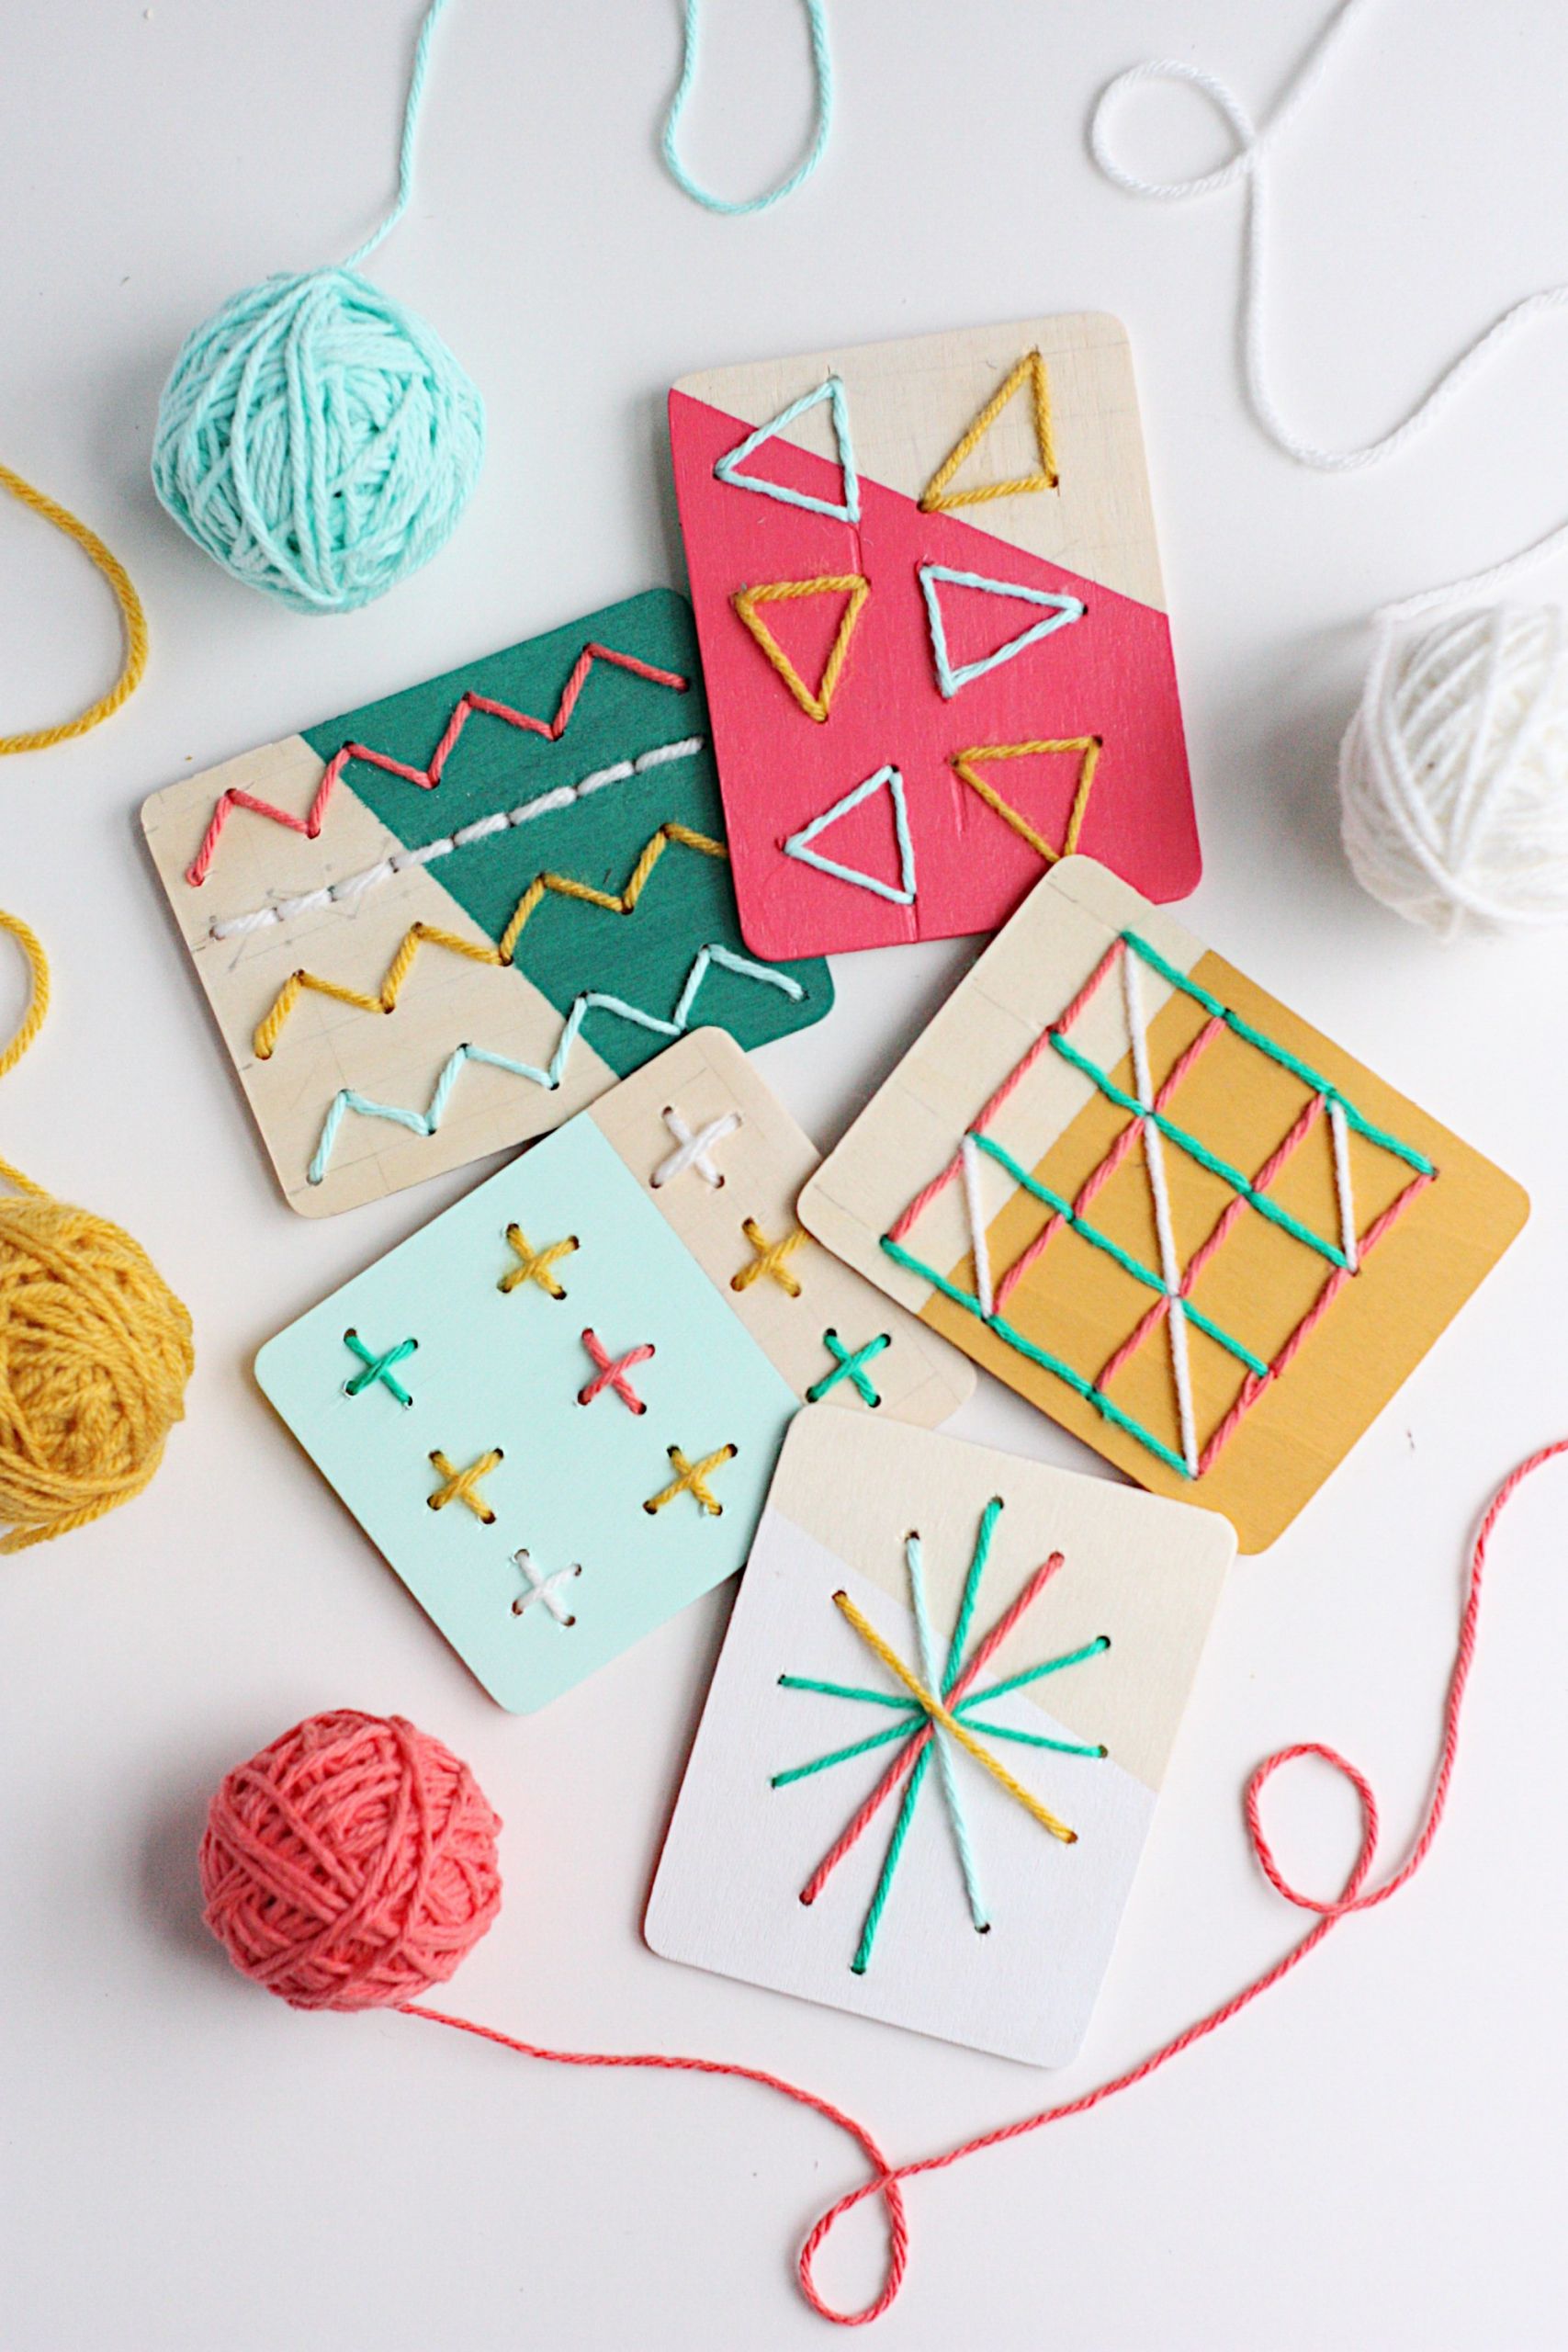 Homemade Projects For Kids
 11 DIY Yarn Crafts That Will Amaze Your Kids Shelterness